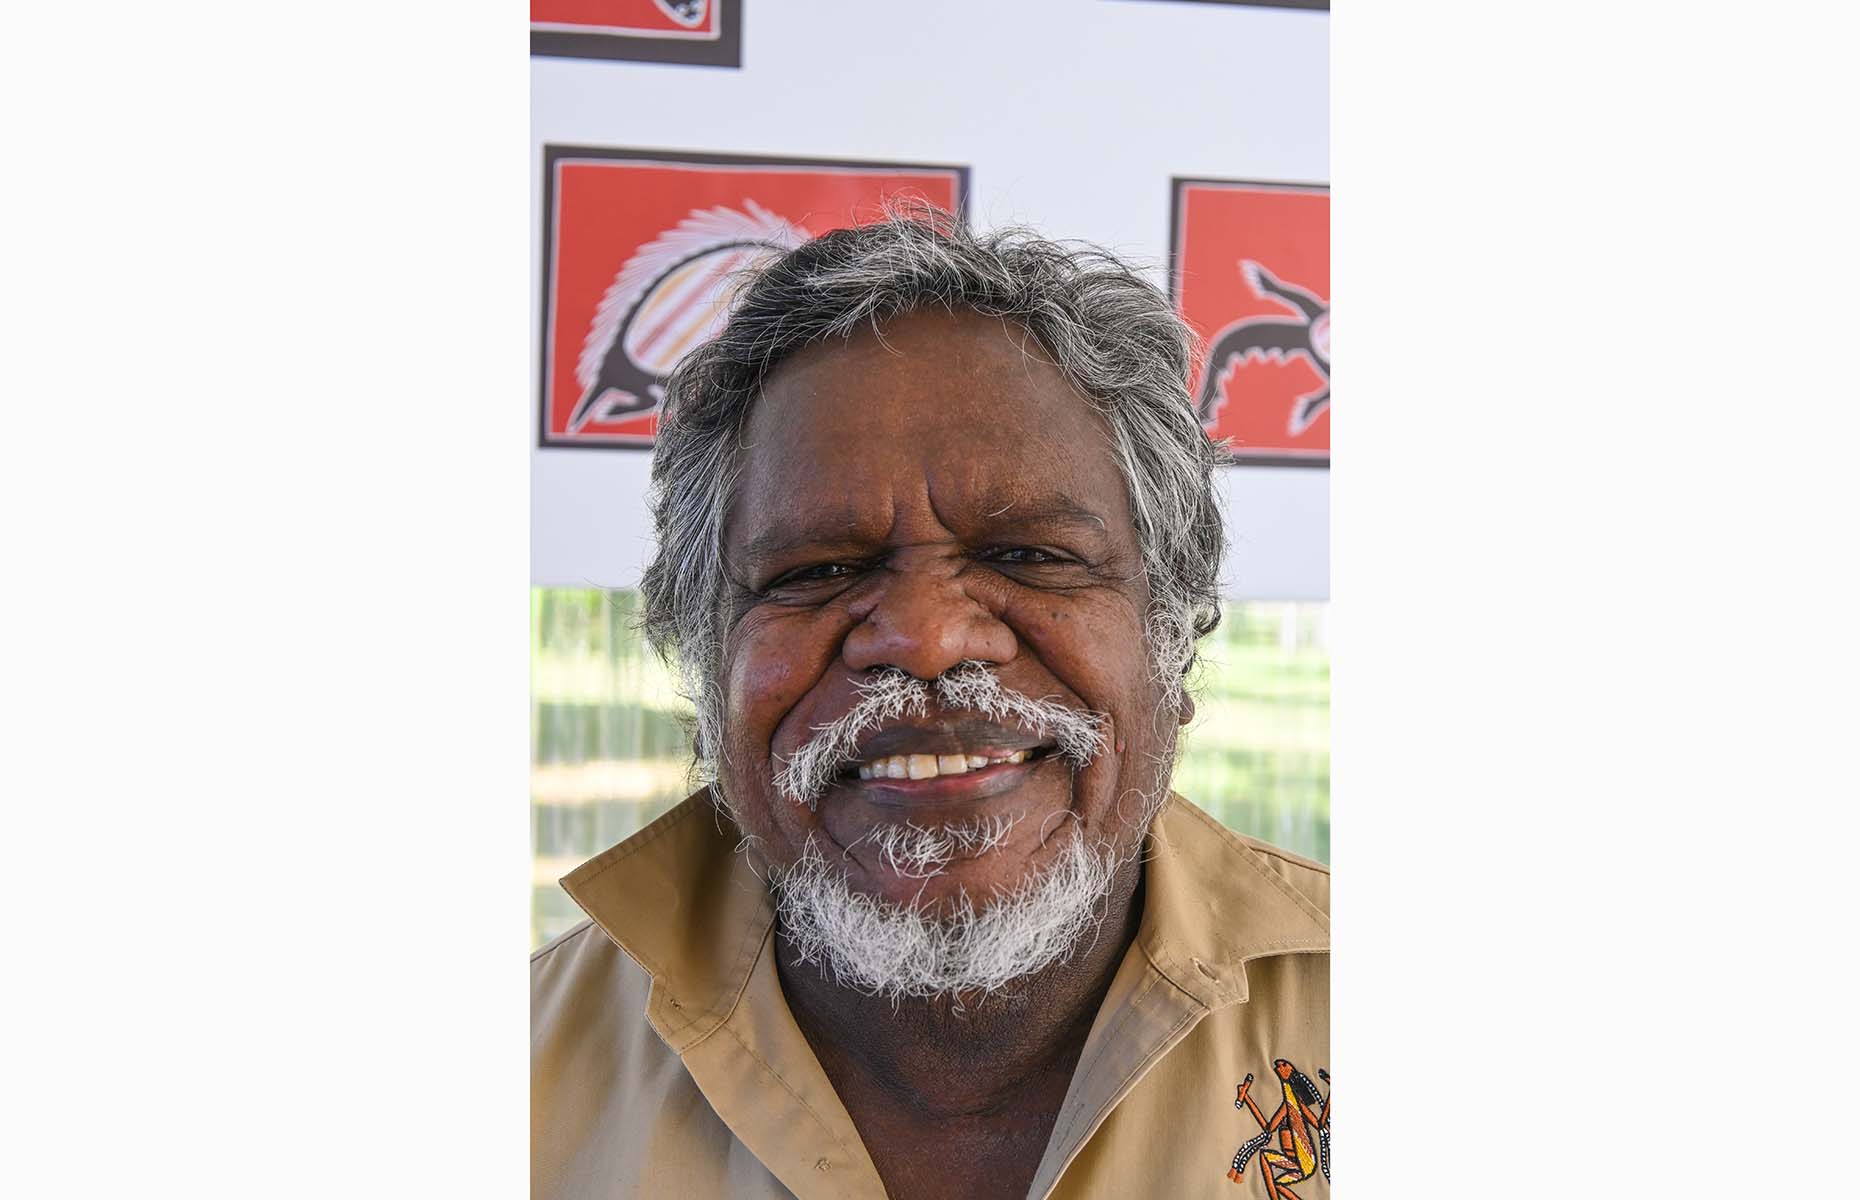 Manuel from Top Didj Gallery in the Northern Territory (Image: Courtesy of Alex Outhwaite)